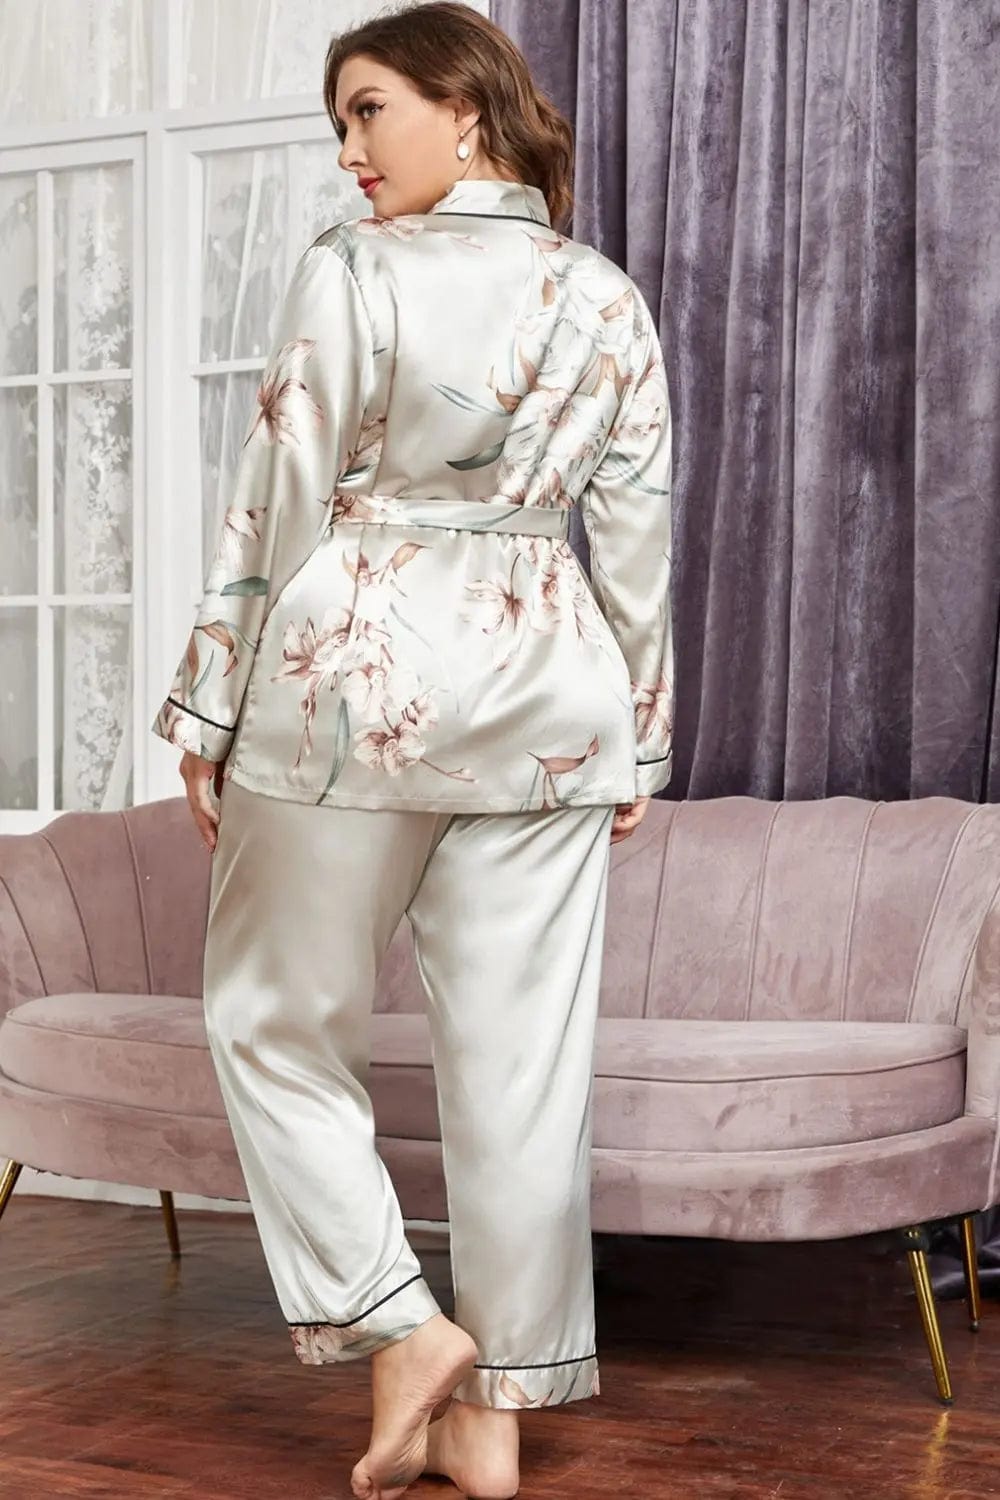 Plus Size Floral Belted Robe and Pants Pajama Set - CLASSY CLOSET BOUTIQUEPlus Size Floral Belted Robe and Pants Pajama Setloungewear plus100100798570216100100798570216Gray1XL